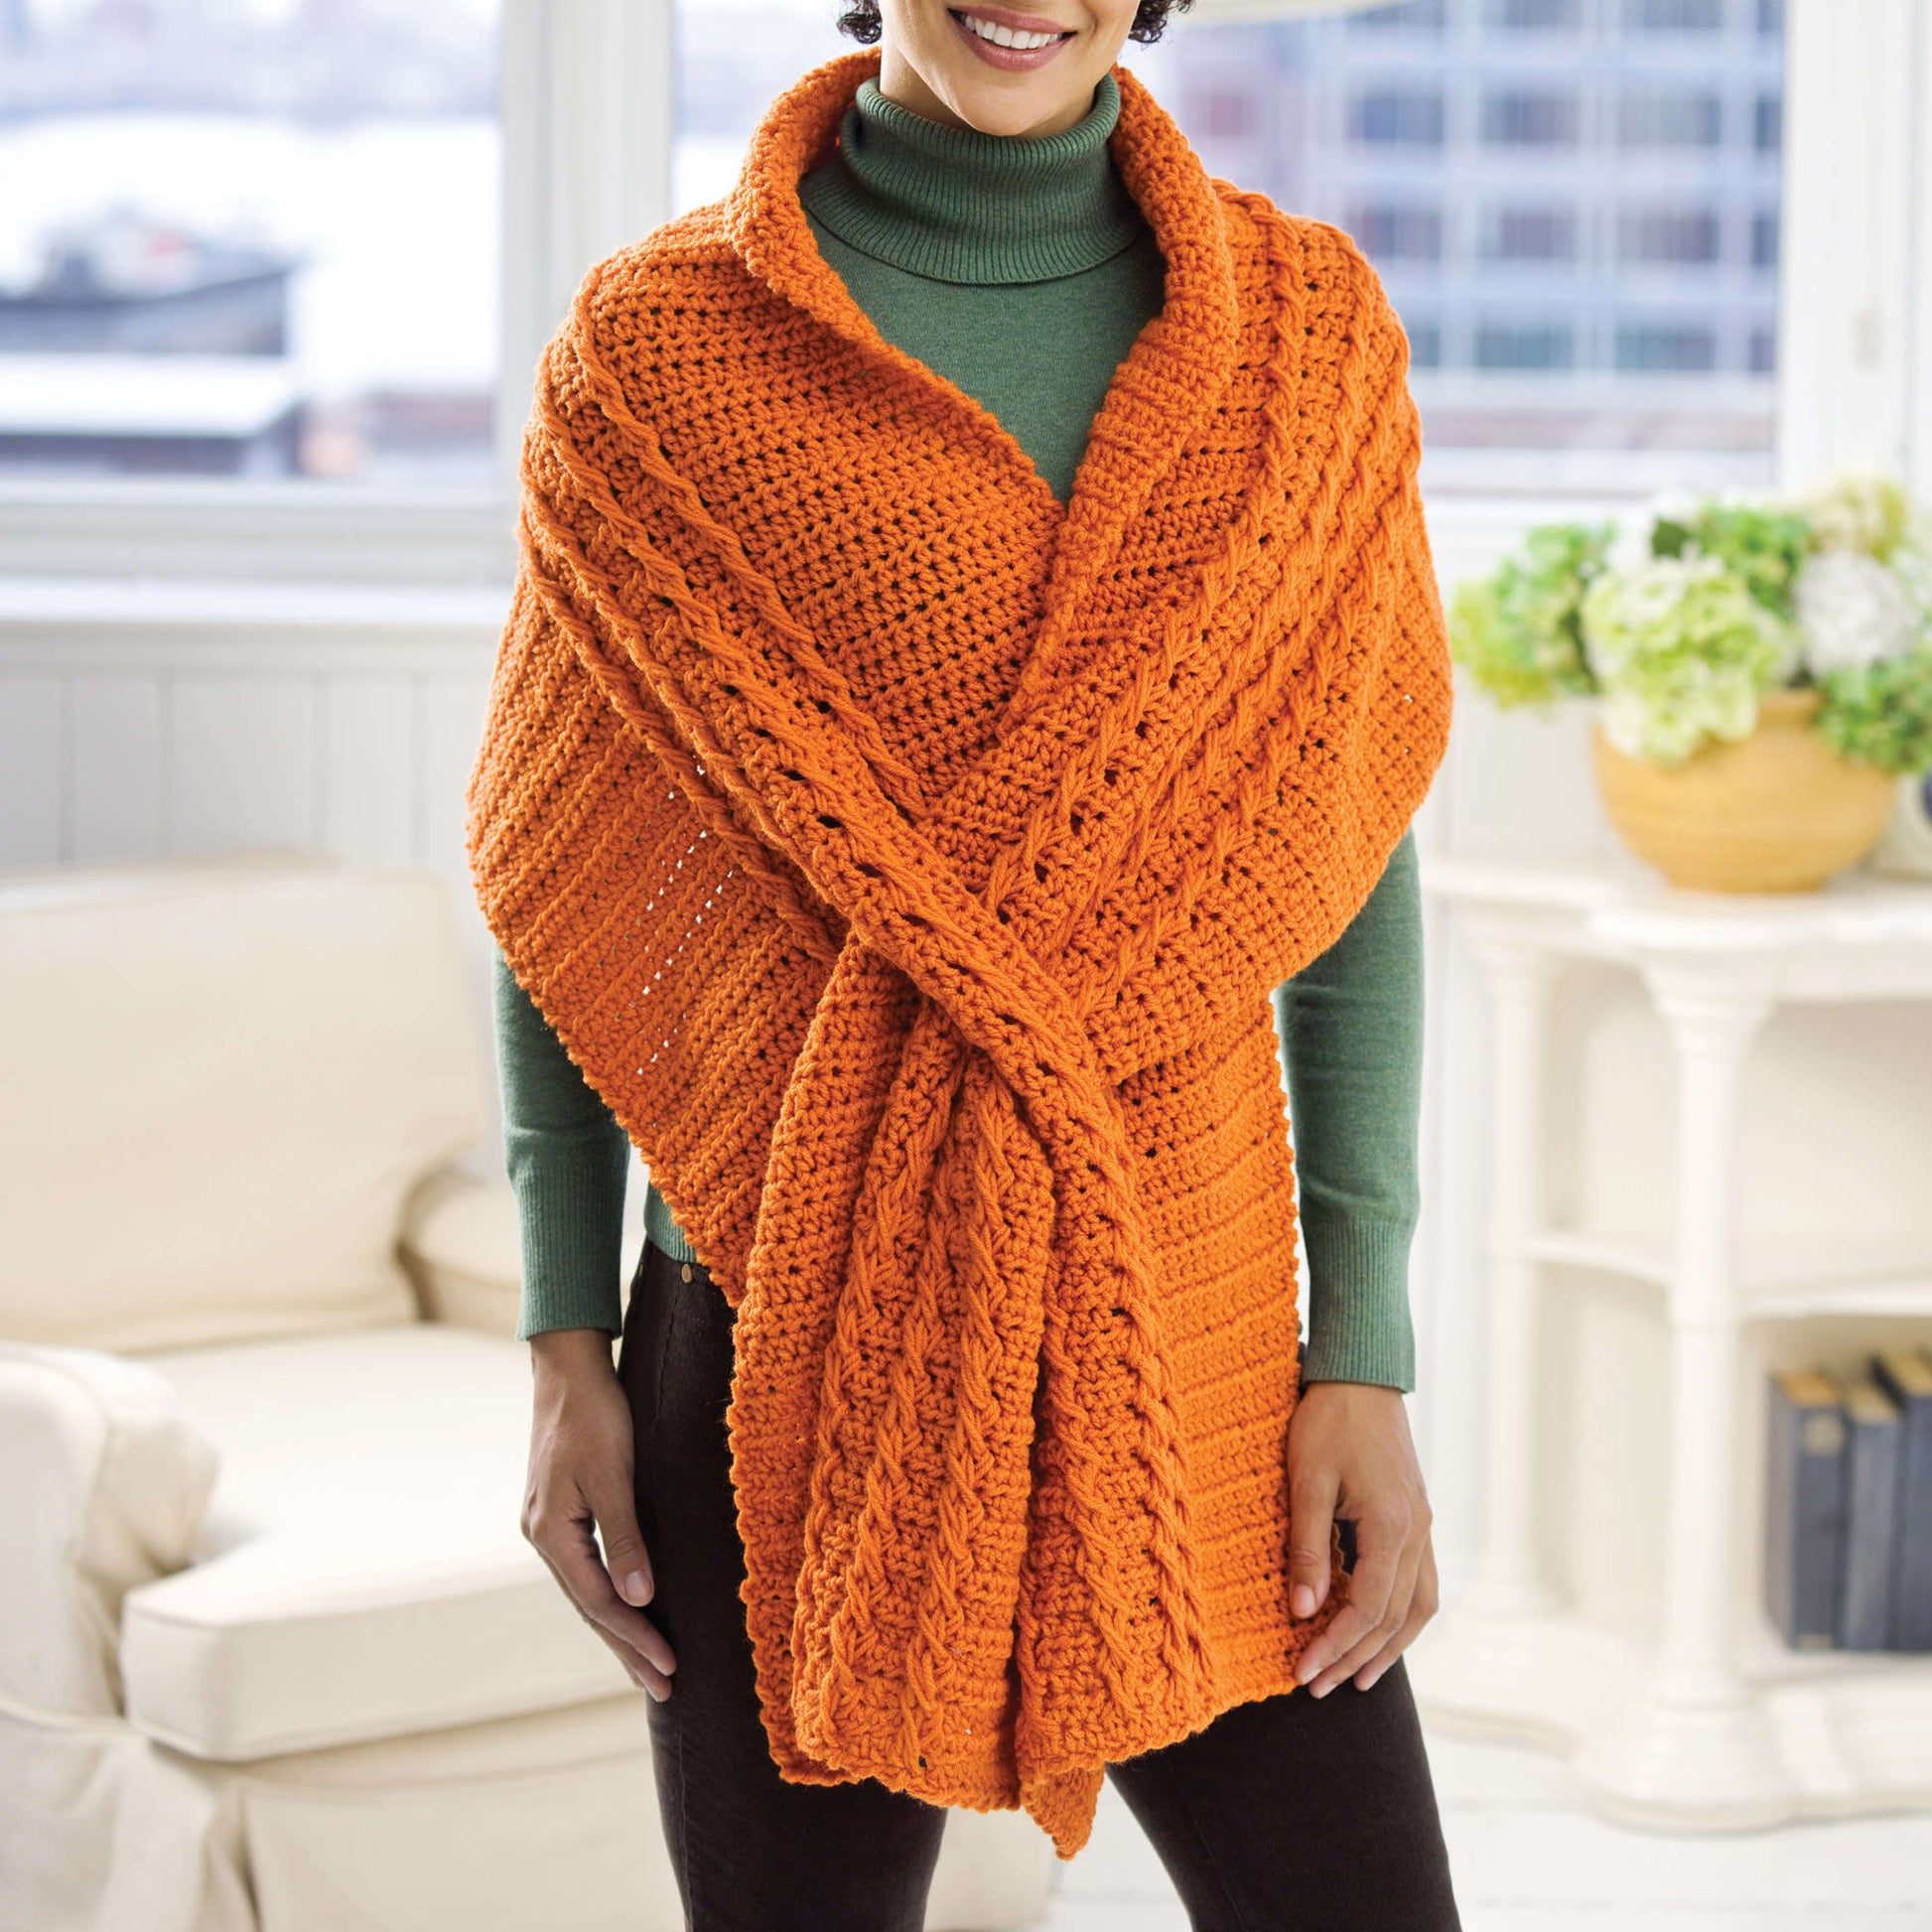 Free Red Heart Wrap With Slits Crochet Pattern